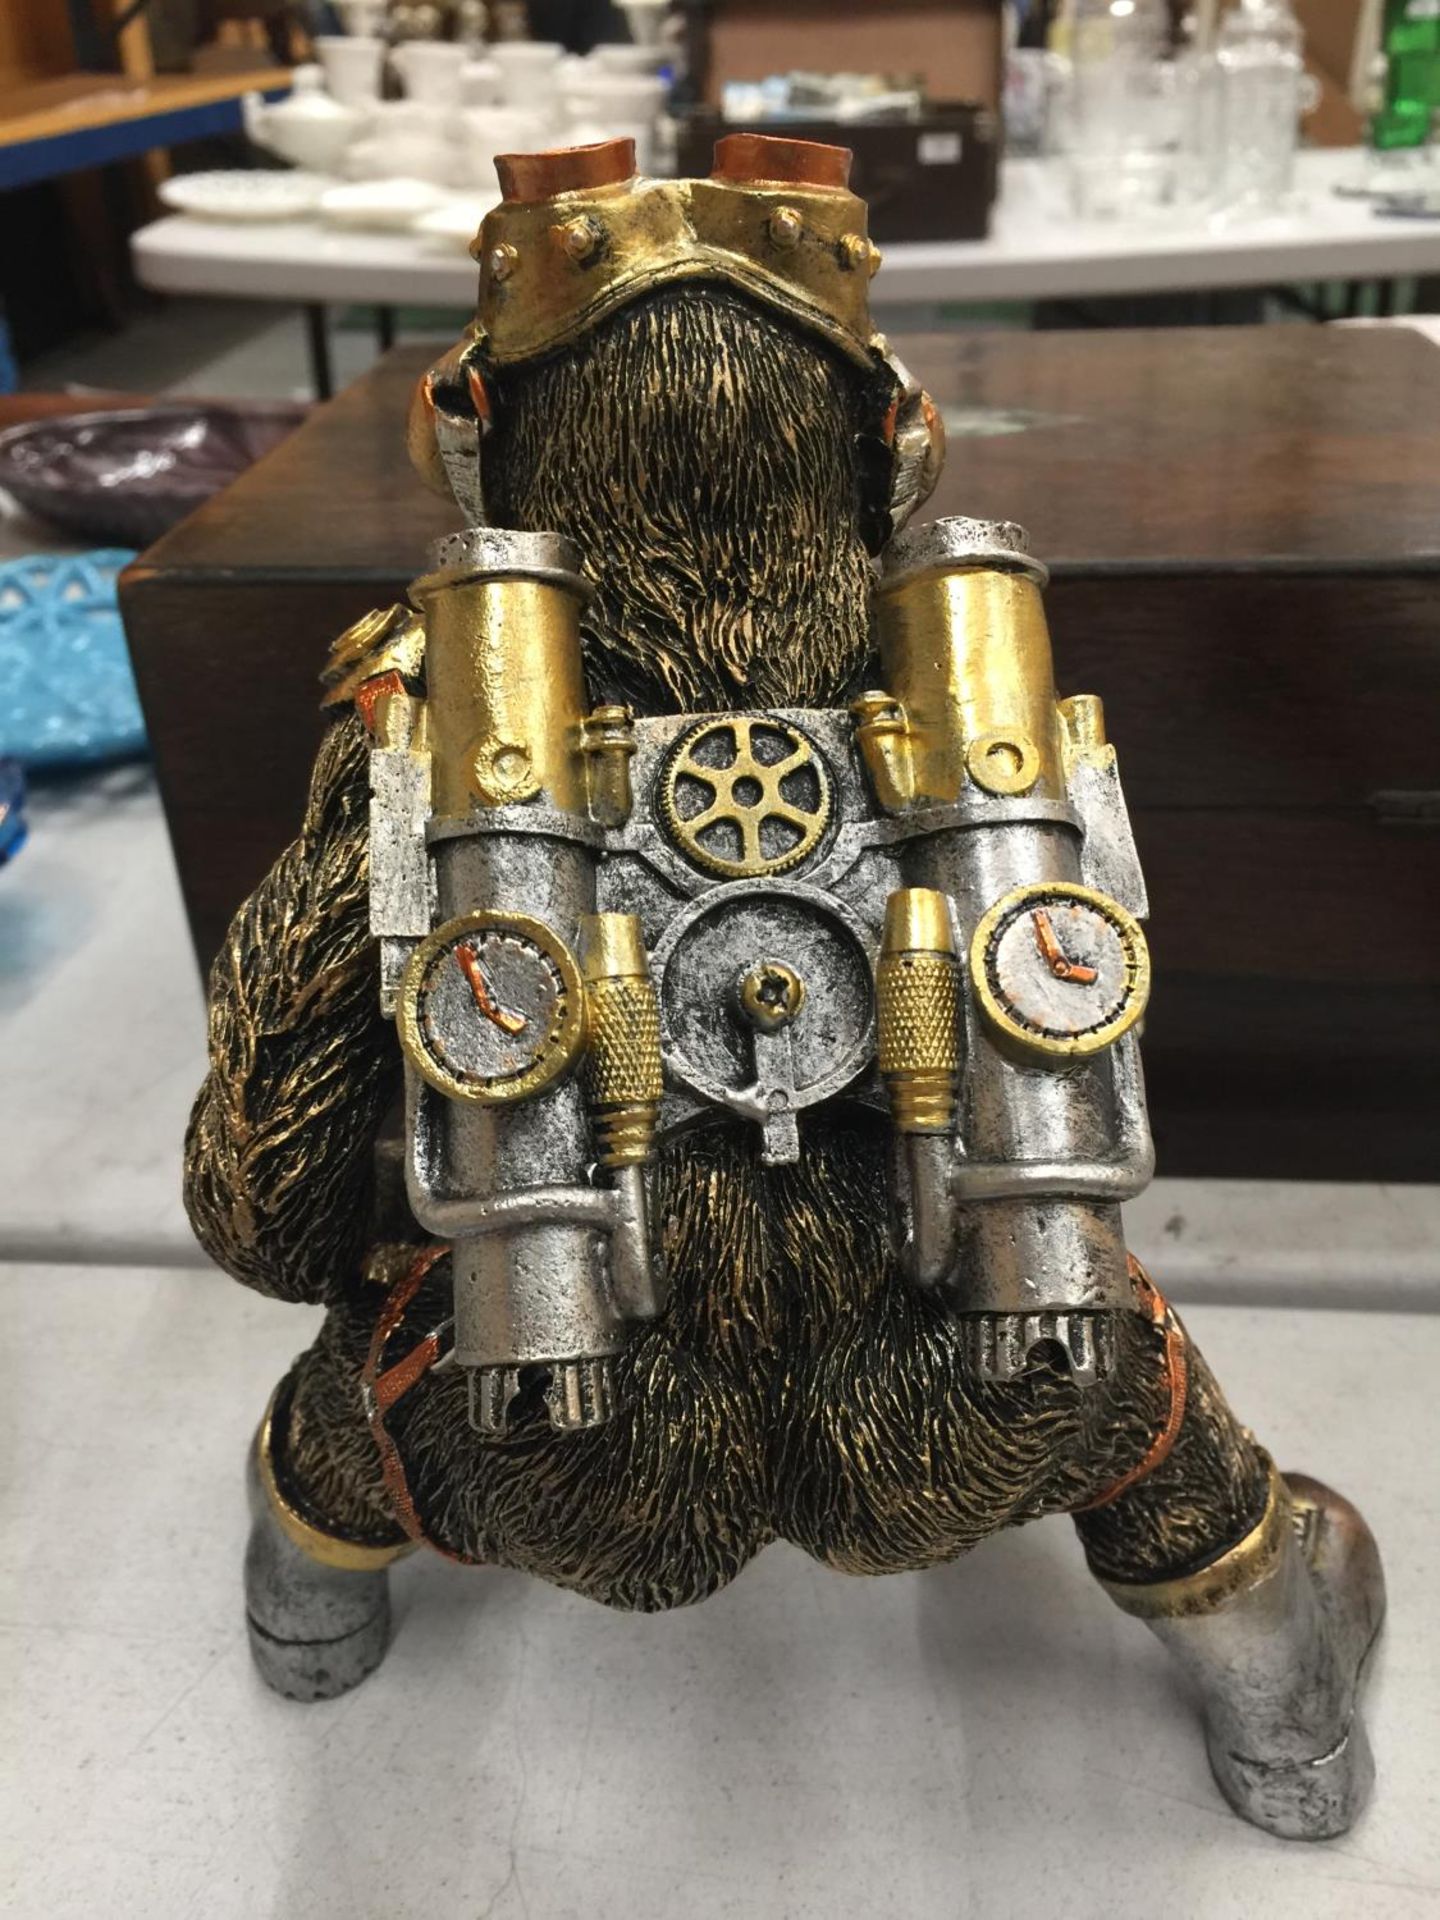 A STEAM PUNK STYLE MONKEY HEIGHT APPROX 20CM - Image 3 of 3